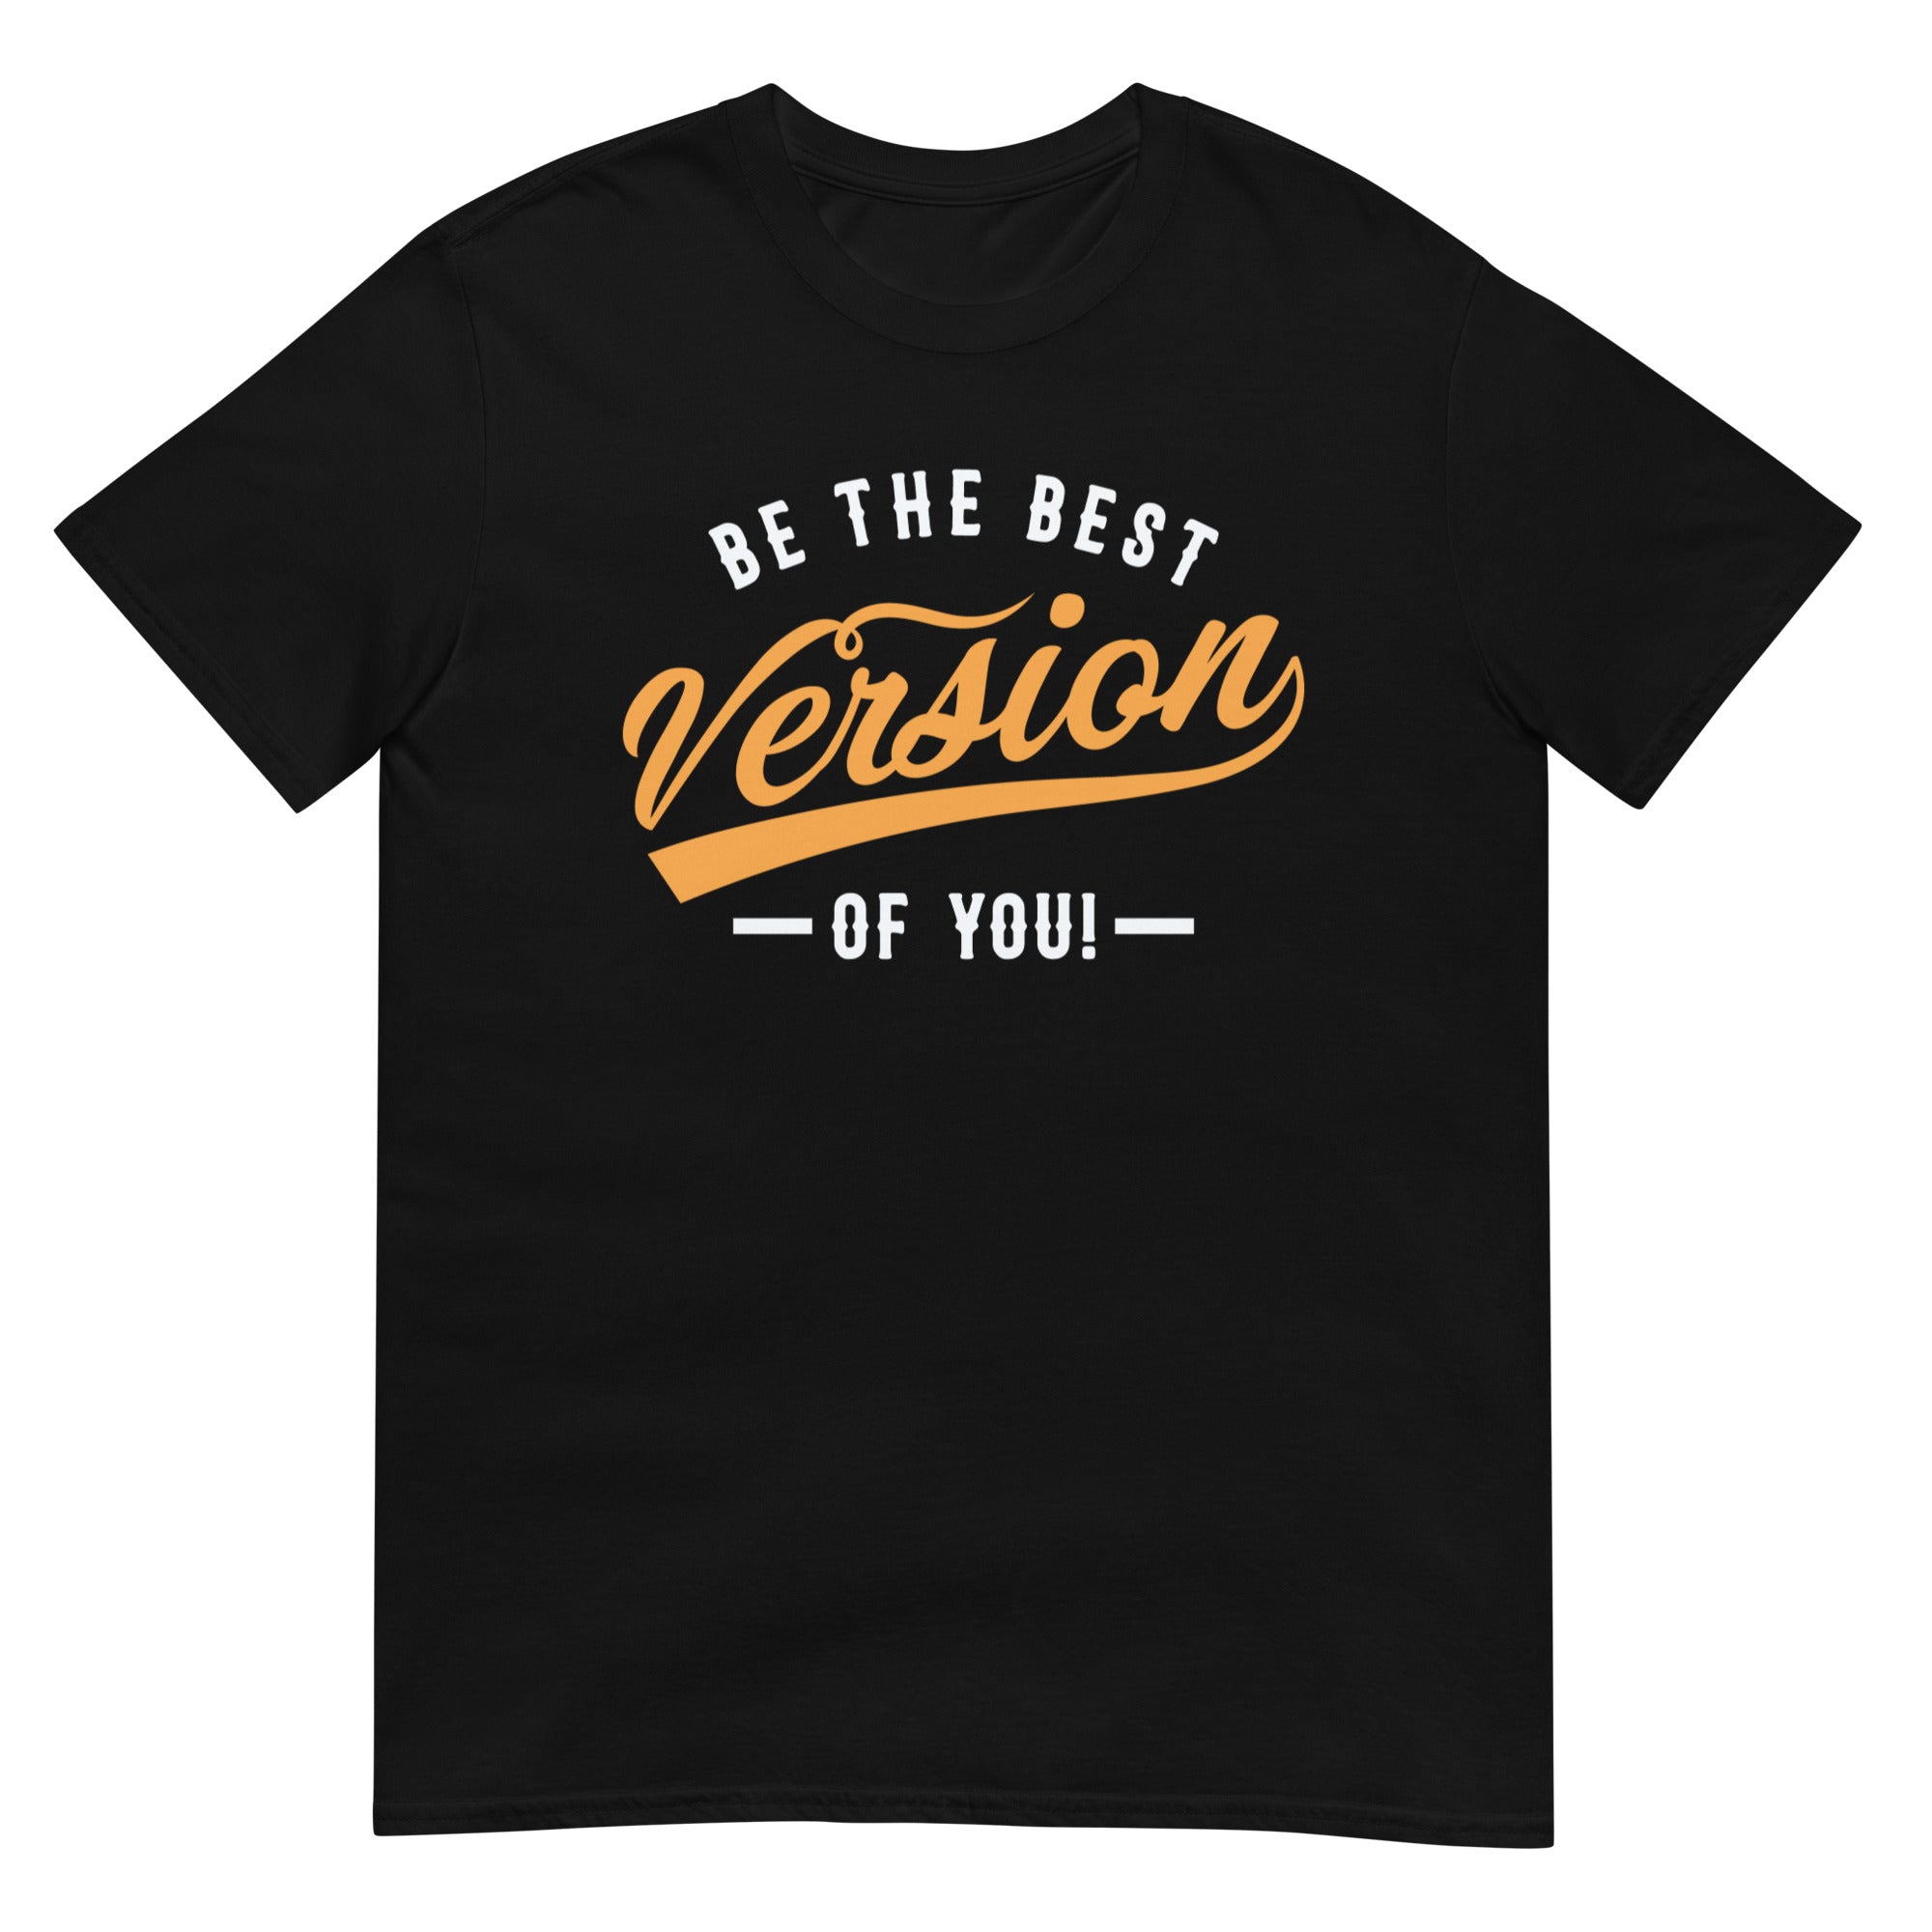 Be The Best Version Of You - Short-Sleeve Unisex T-Shirt